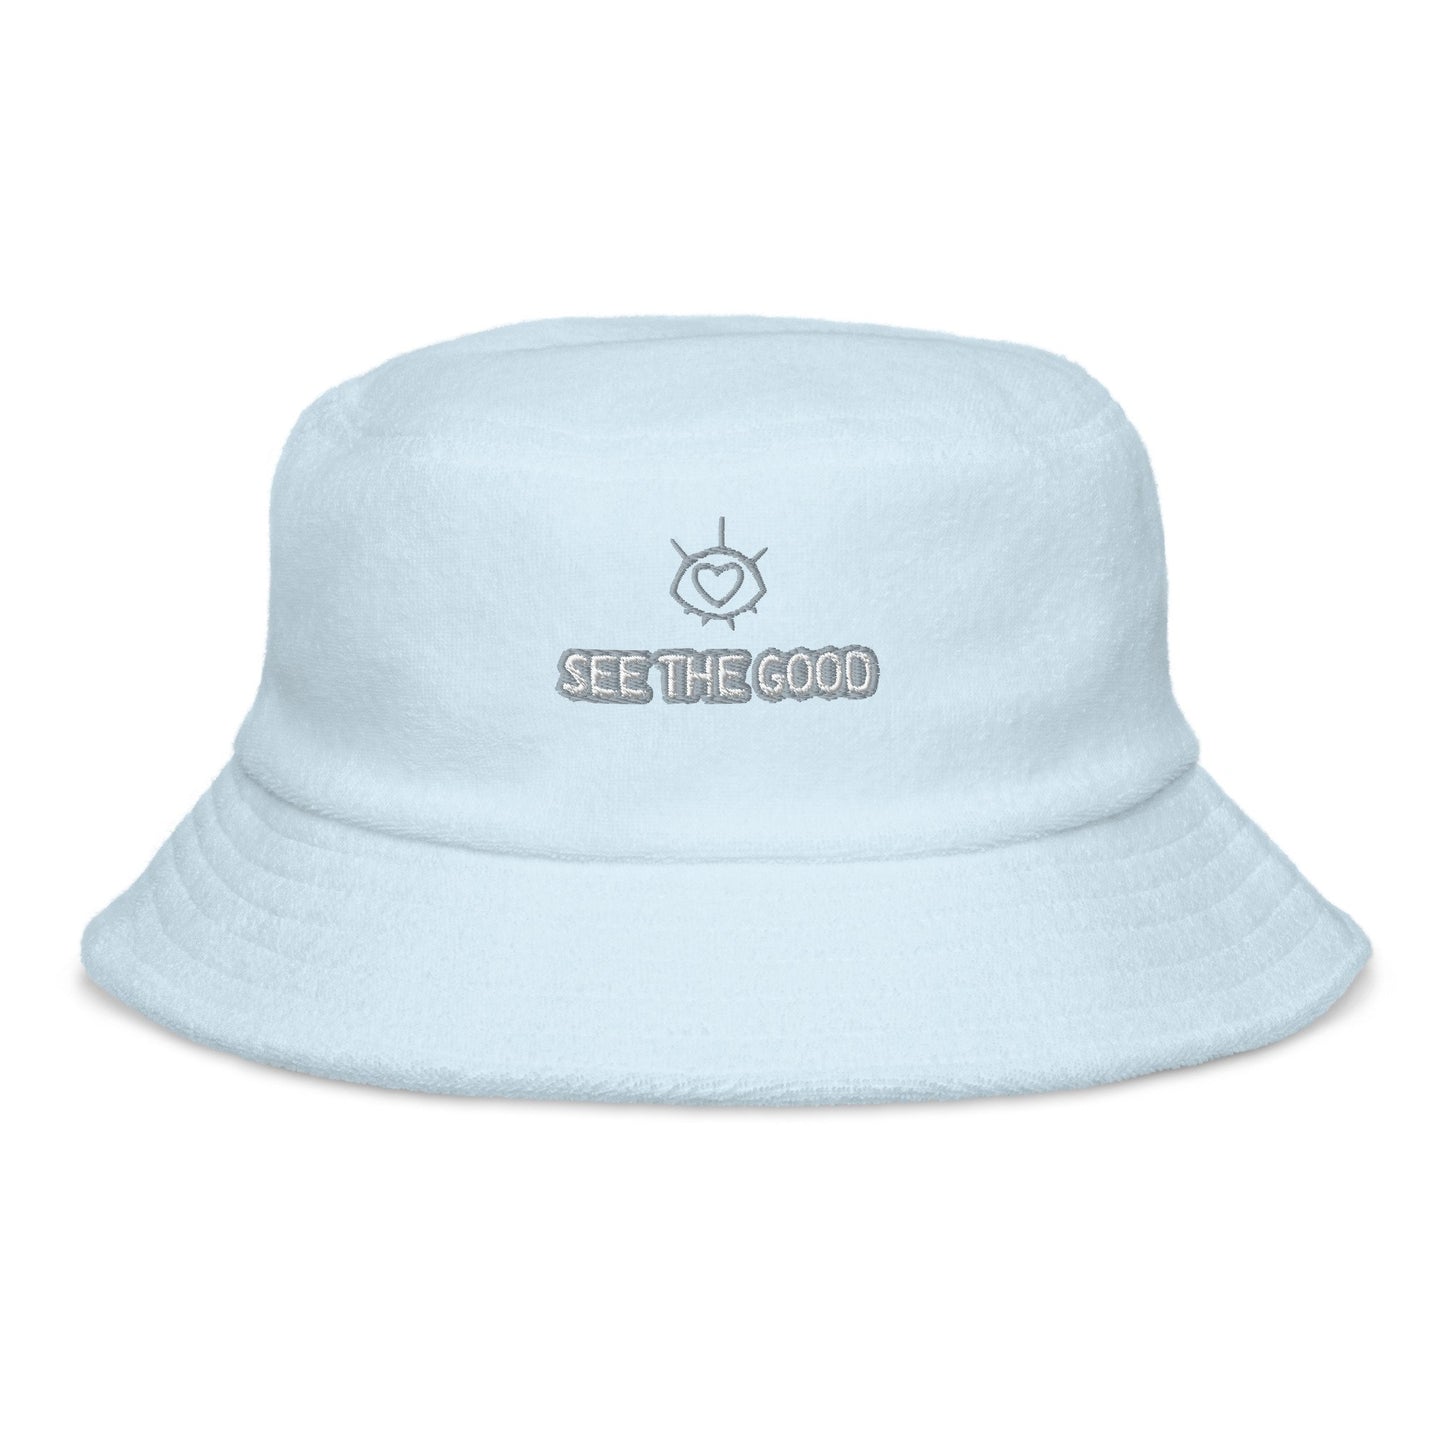 See the Good - Unstructured terry cloth bucket hat